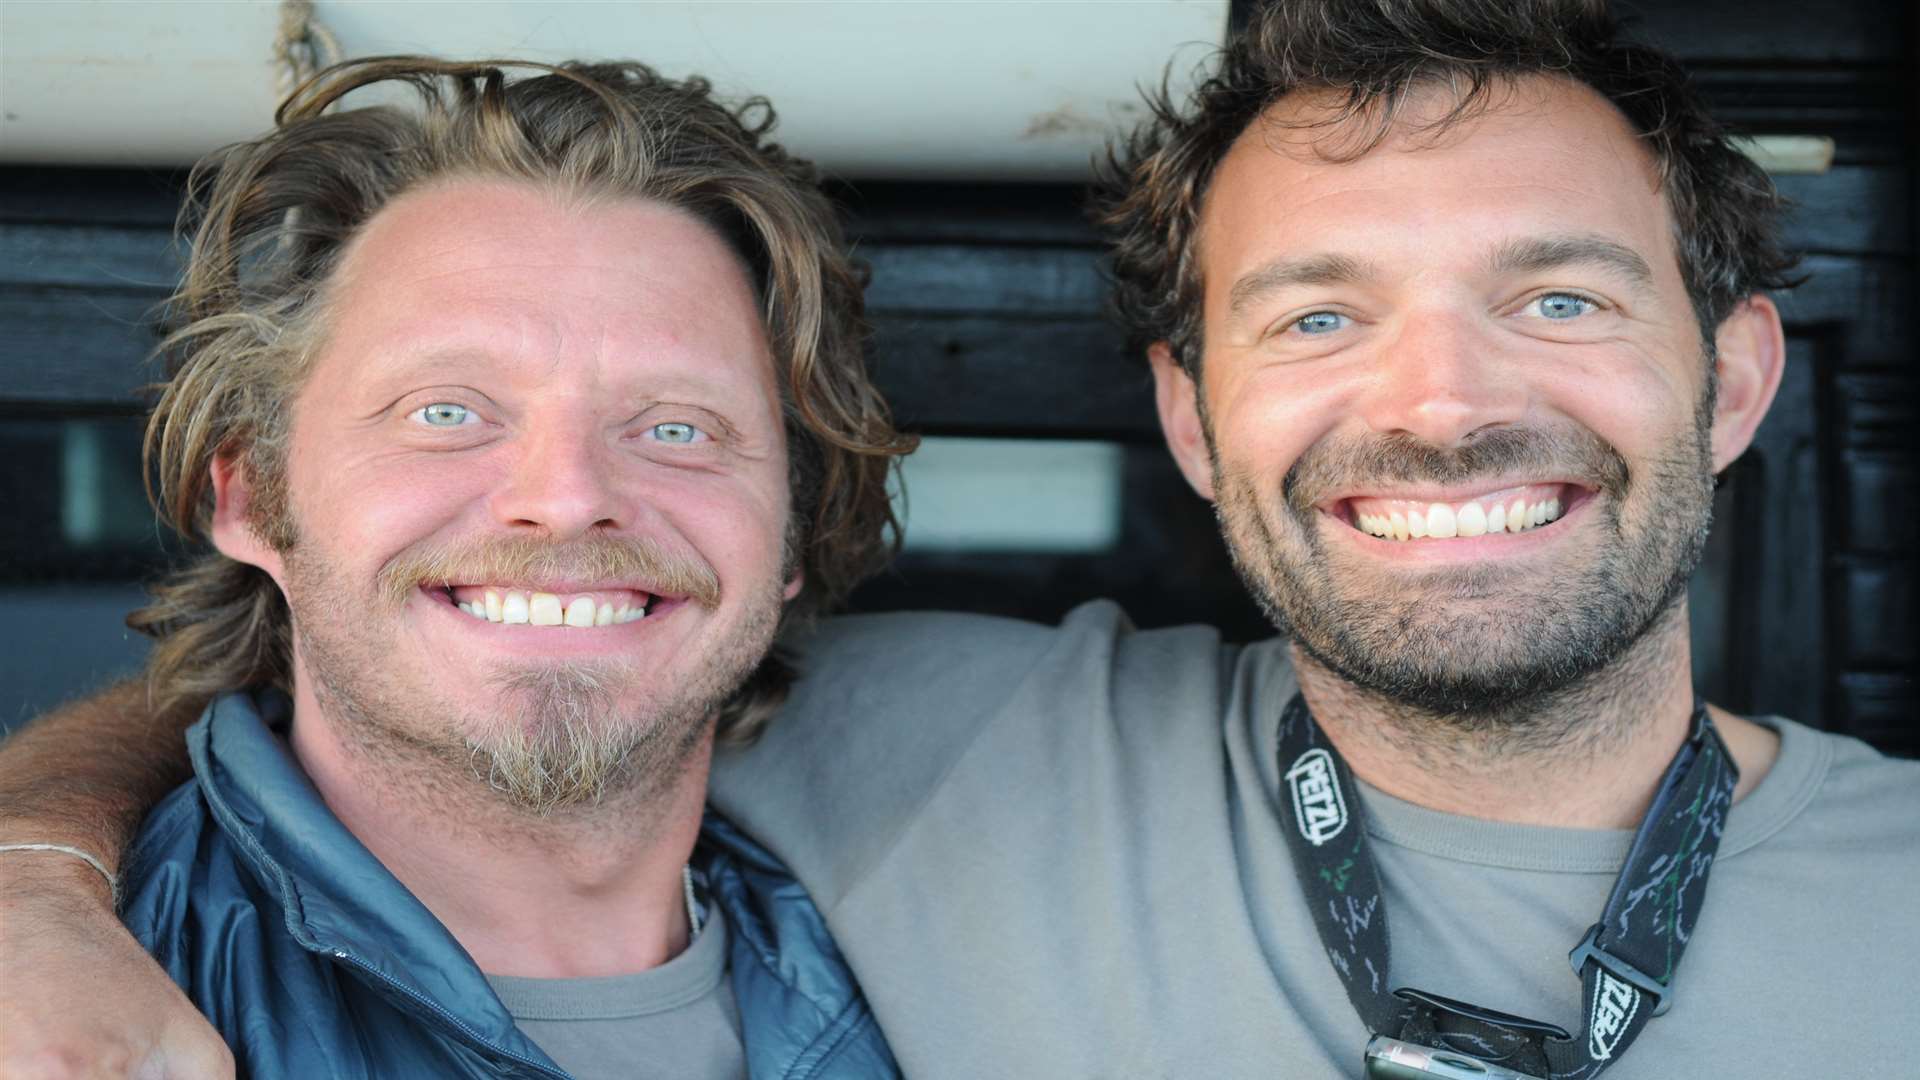 Mungo travelled across Australia with Charley Boorman